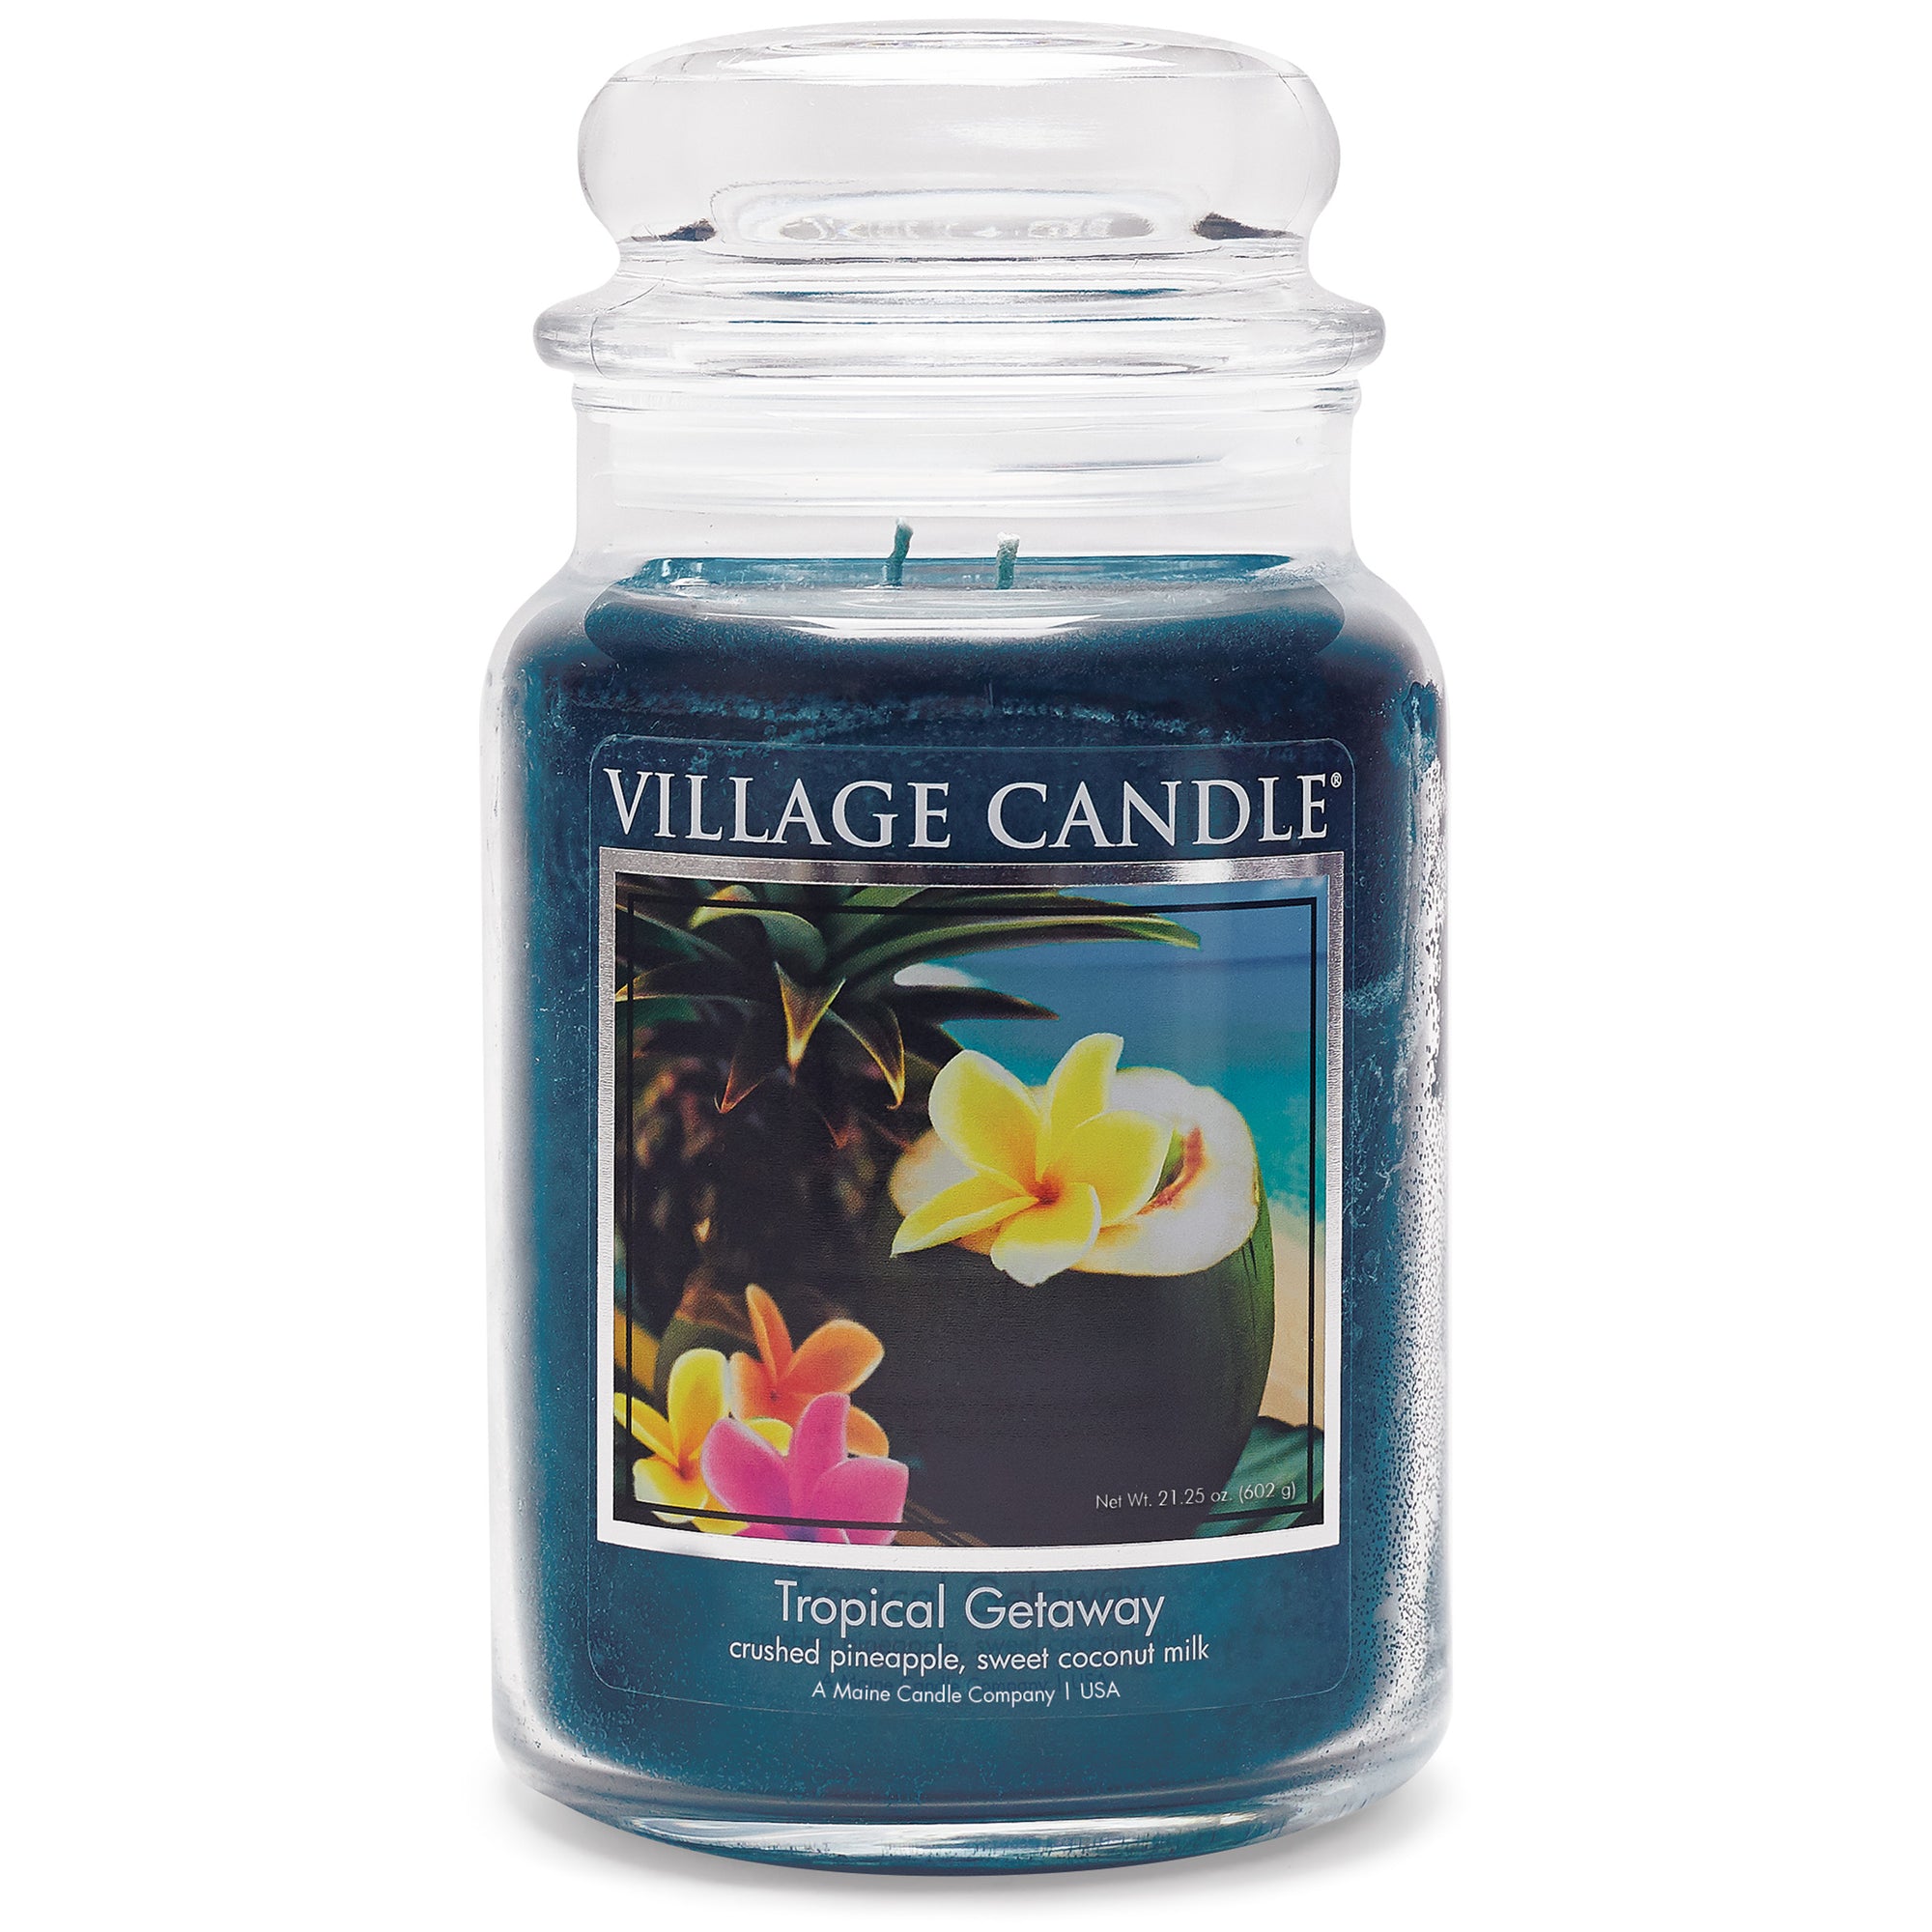 Village Candle - Tropical Getaway - Large Glass Dome